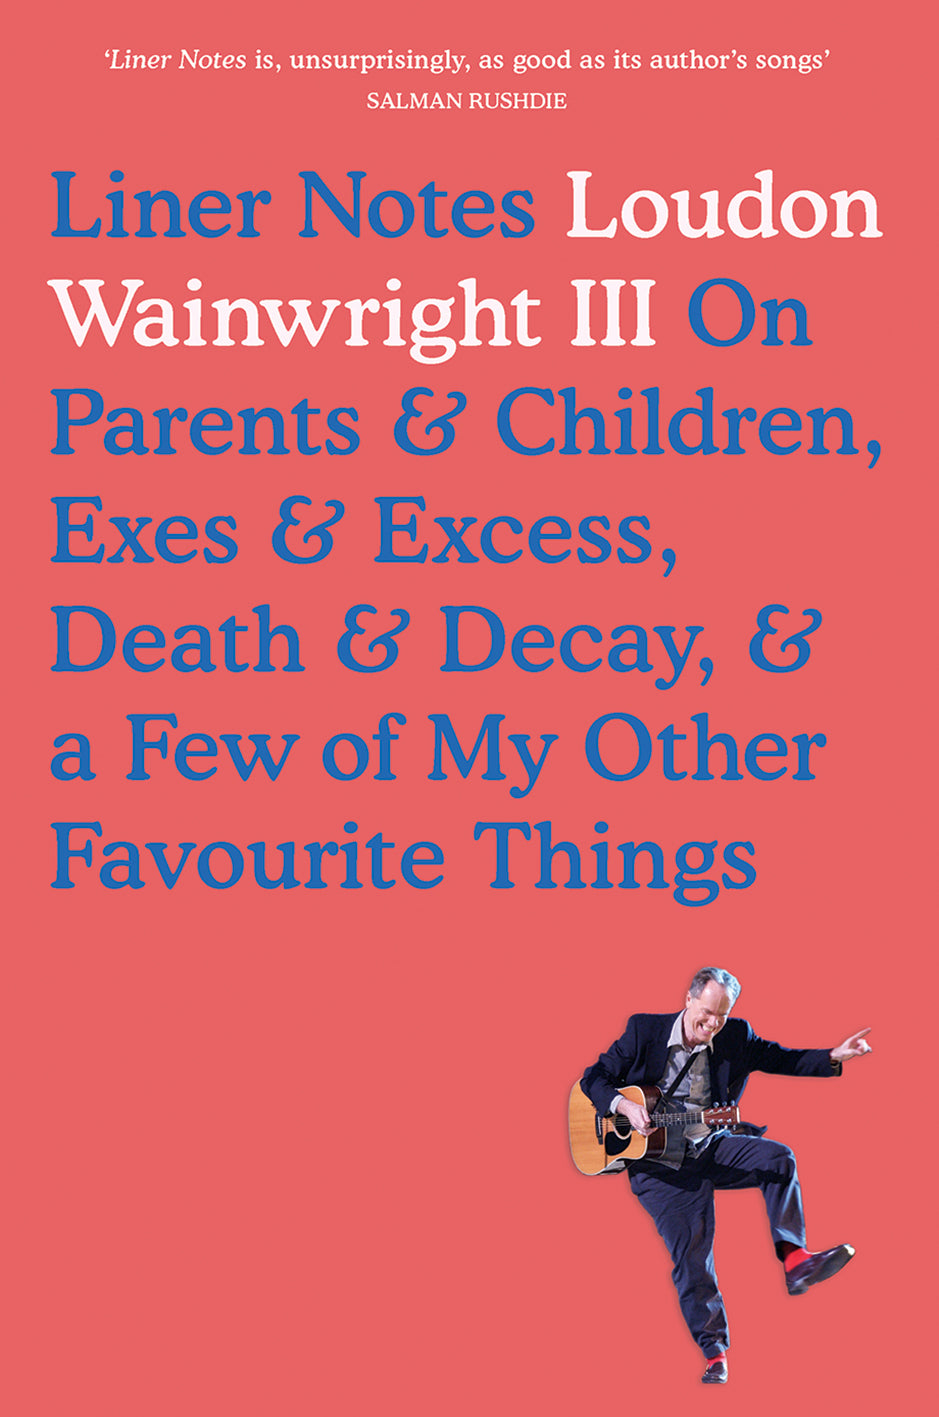 Liner Notes: Loudon Wainwright III on Parents & Children, Exes & Excess, Death & Decay, & a Few of My Other Favourite Things